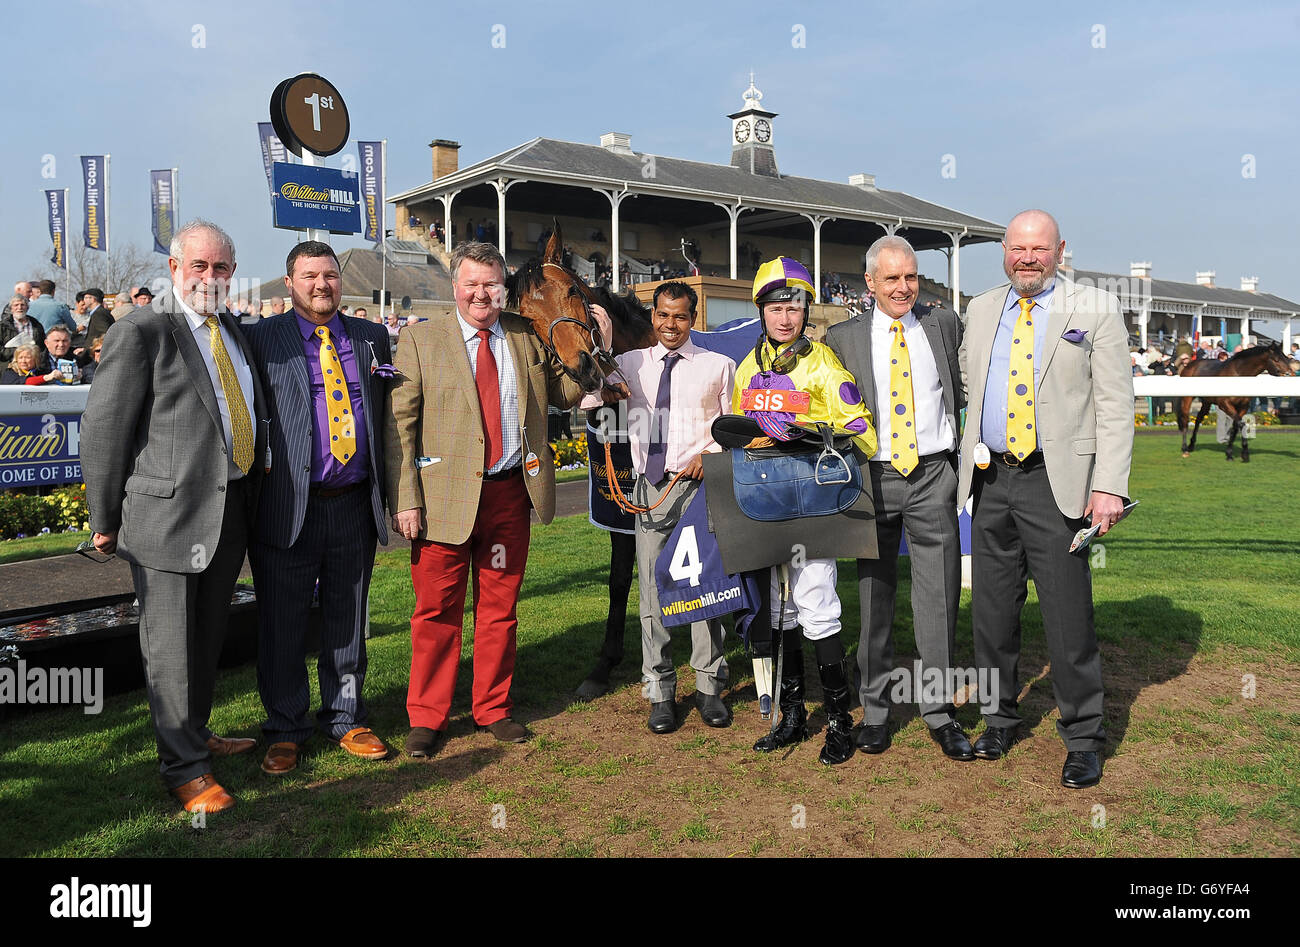 Horse Racing - 2014 William Hill Lincoln - Day One - Doncaster Racecourse Stock Photo